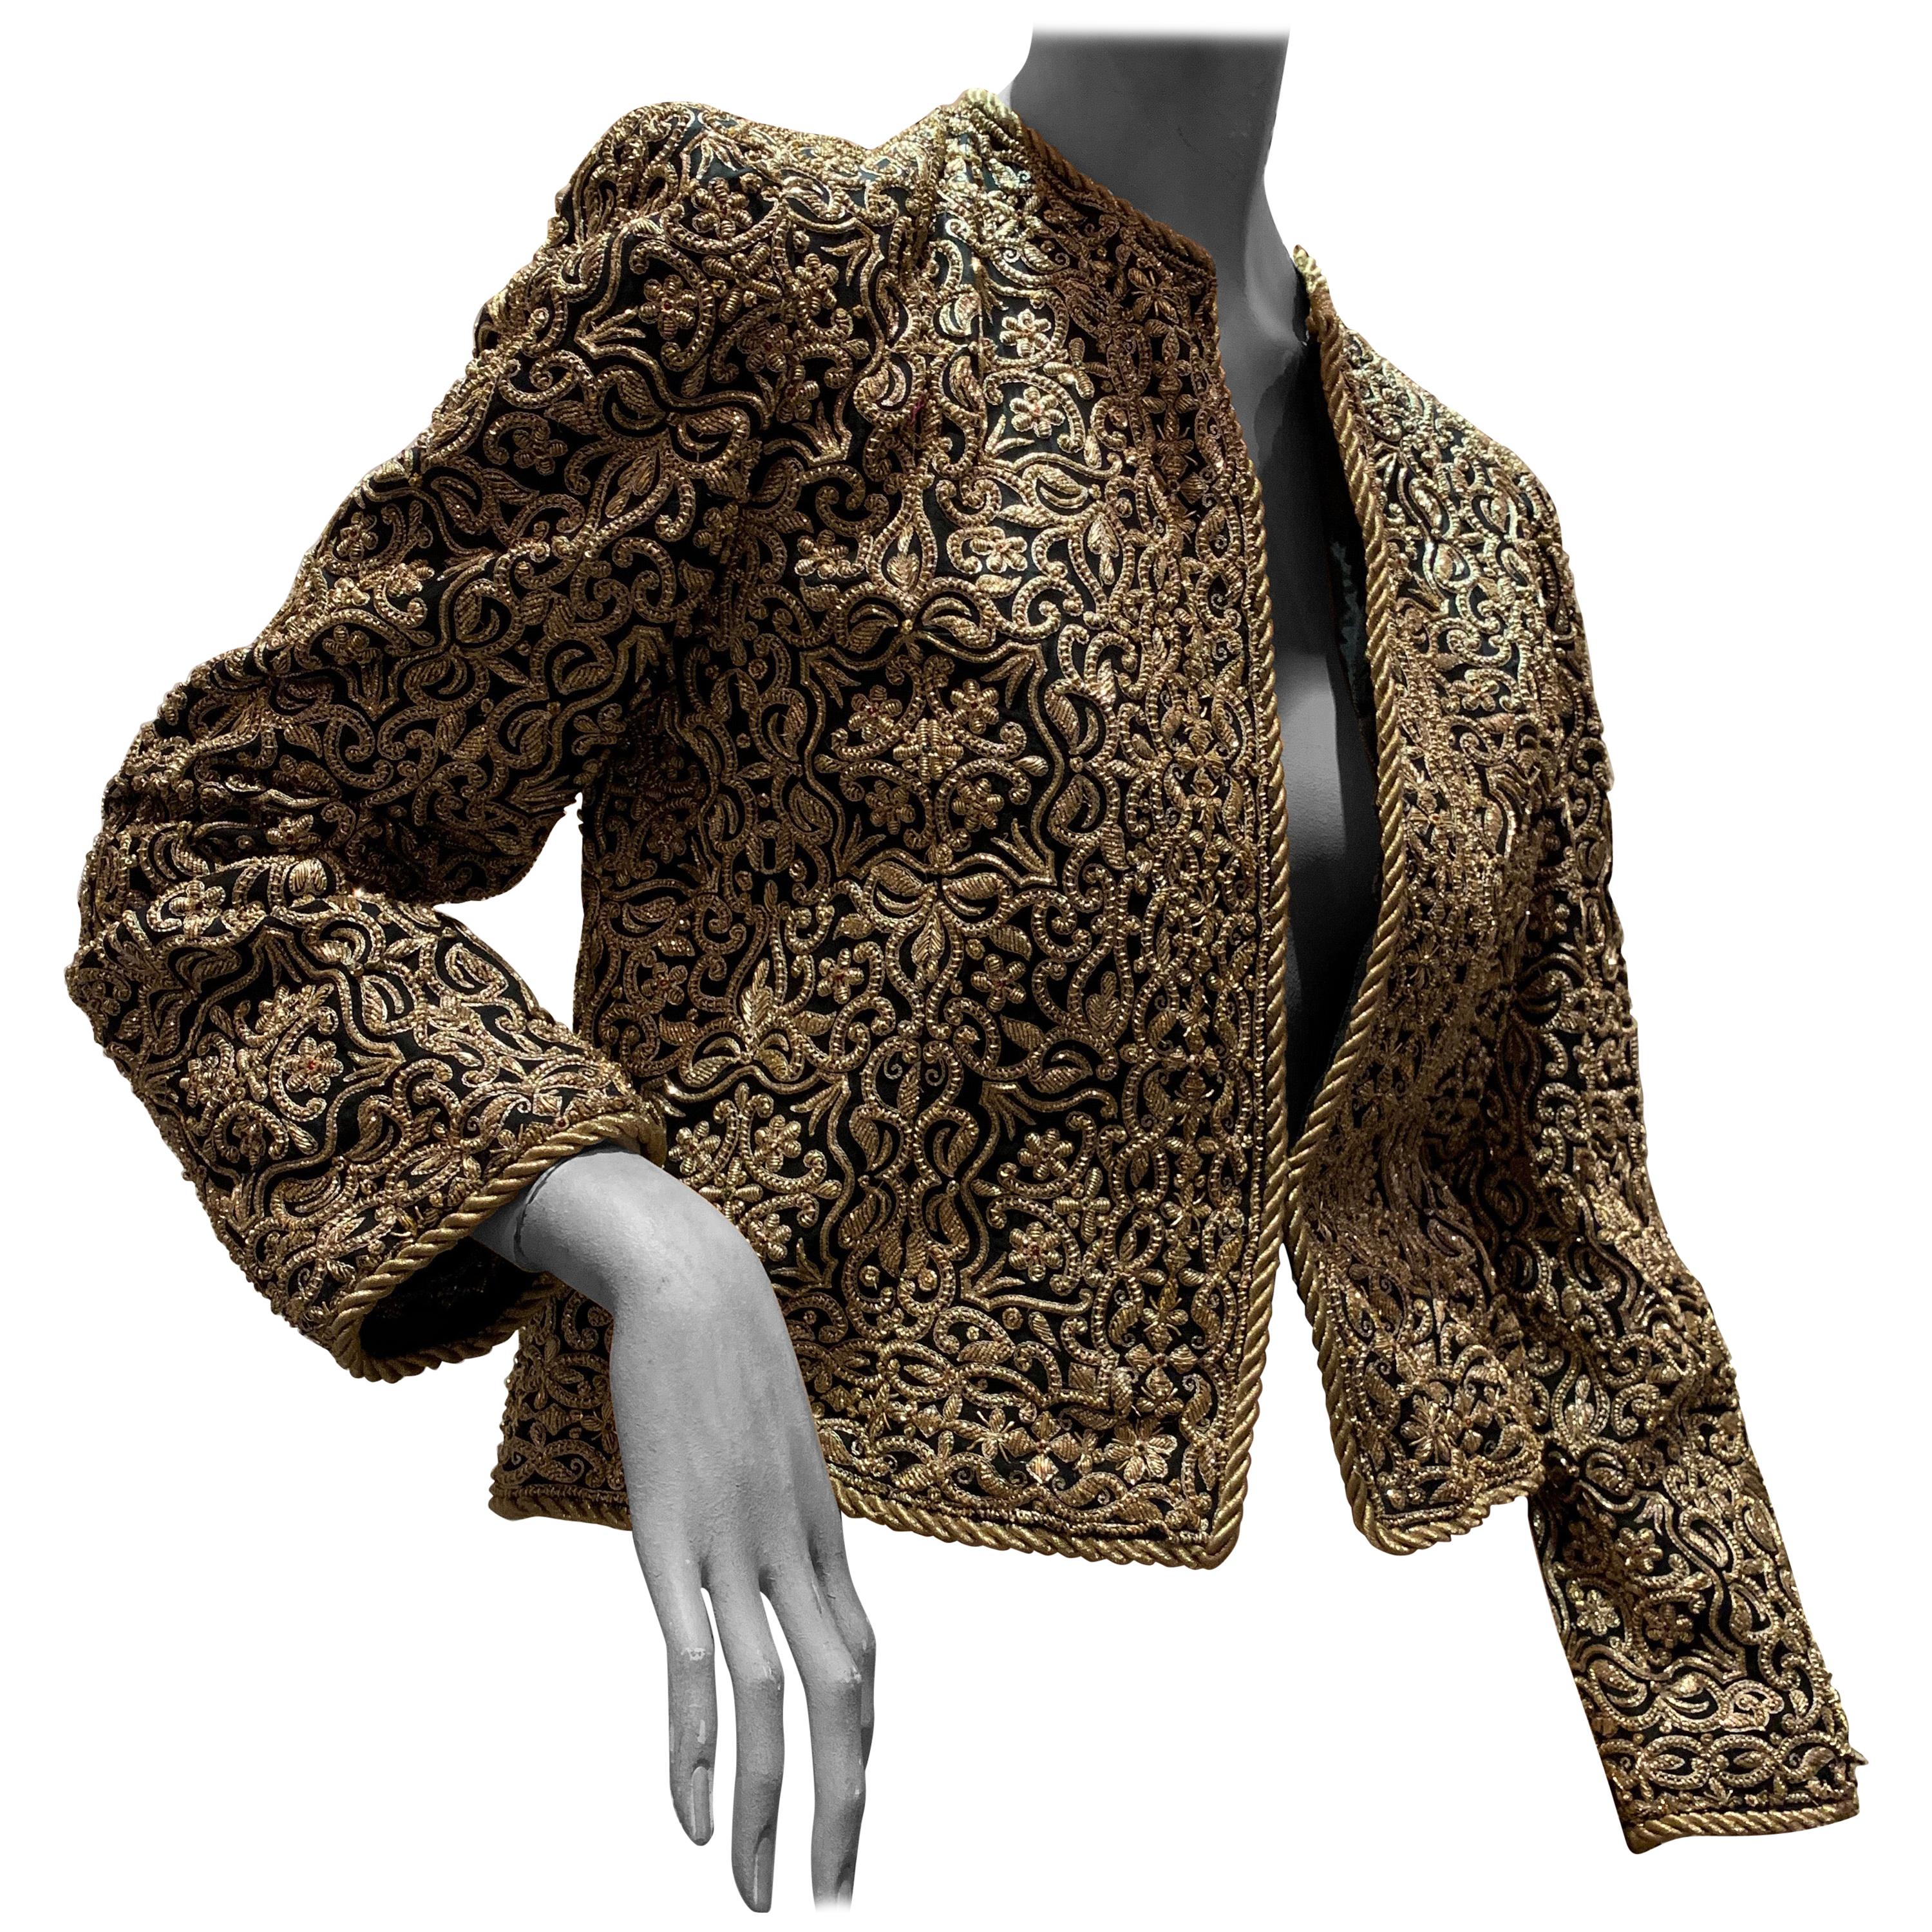 1980s  Bill Blass Evening Jacket W/ Heavily Encrusted Chain Embriodery Gold Work For Sale